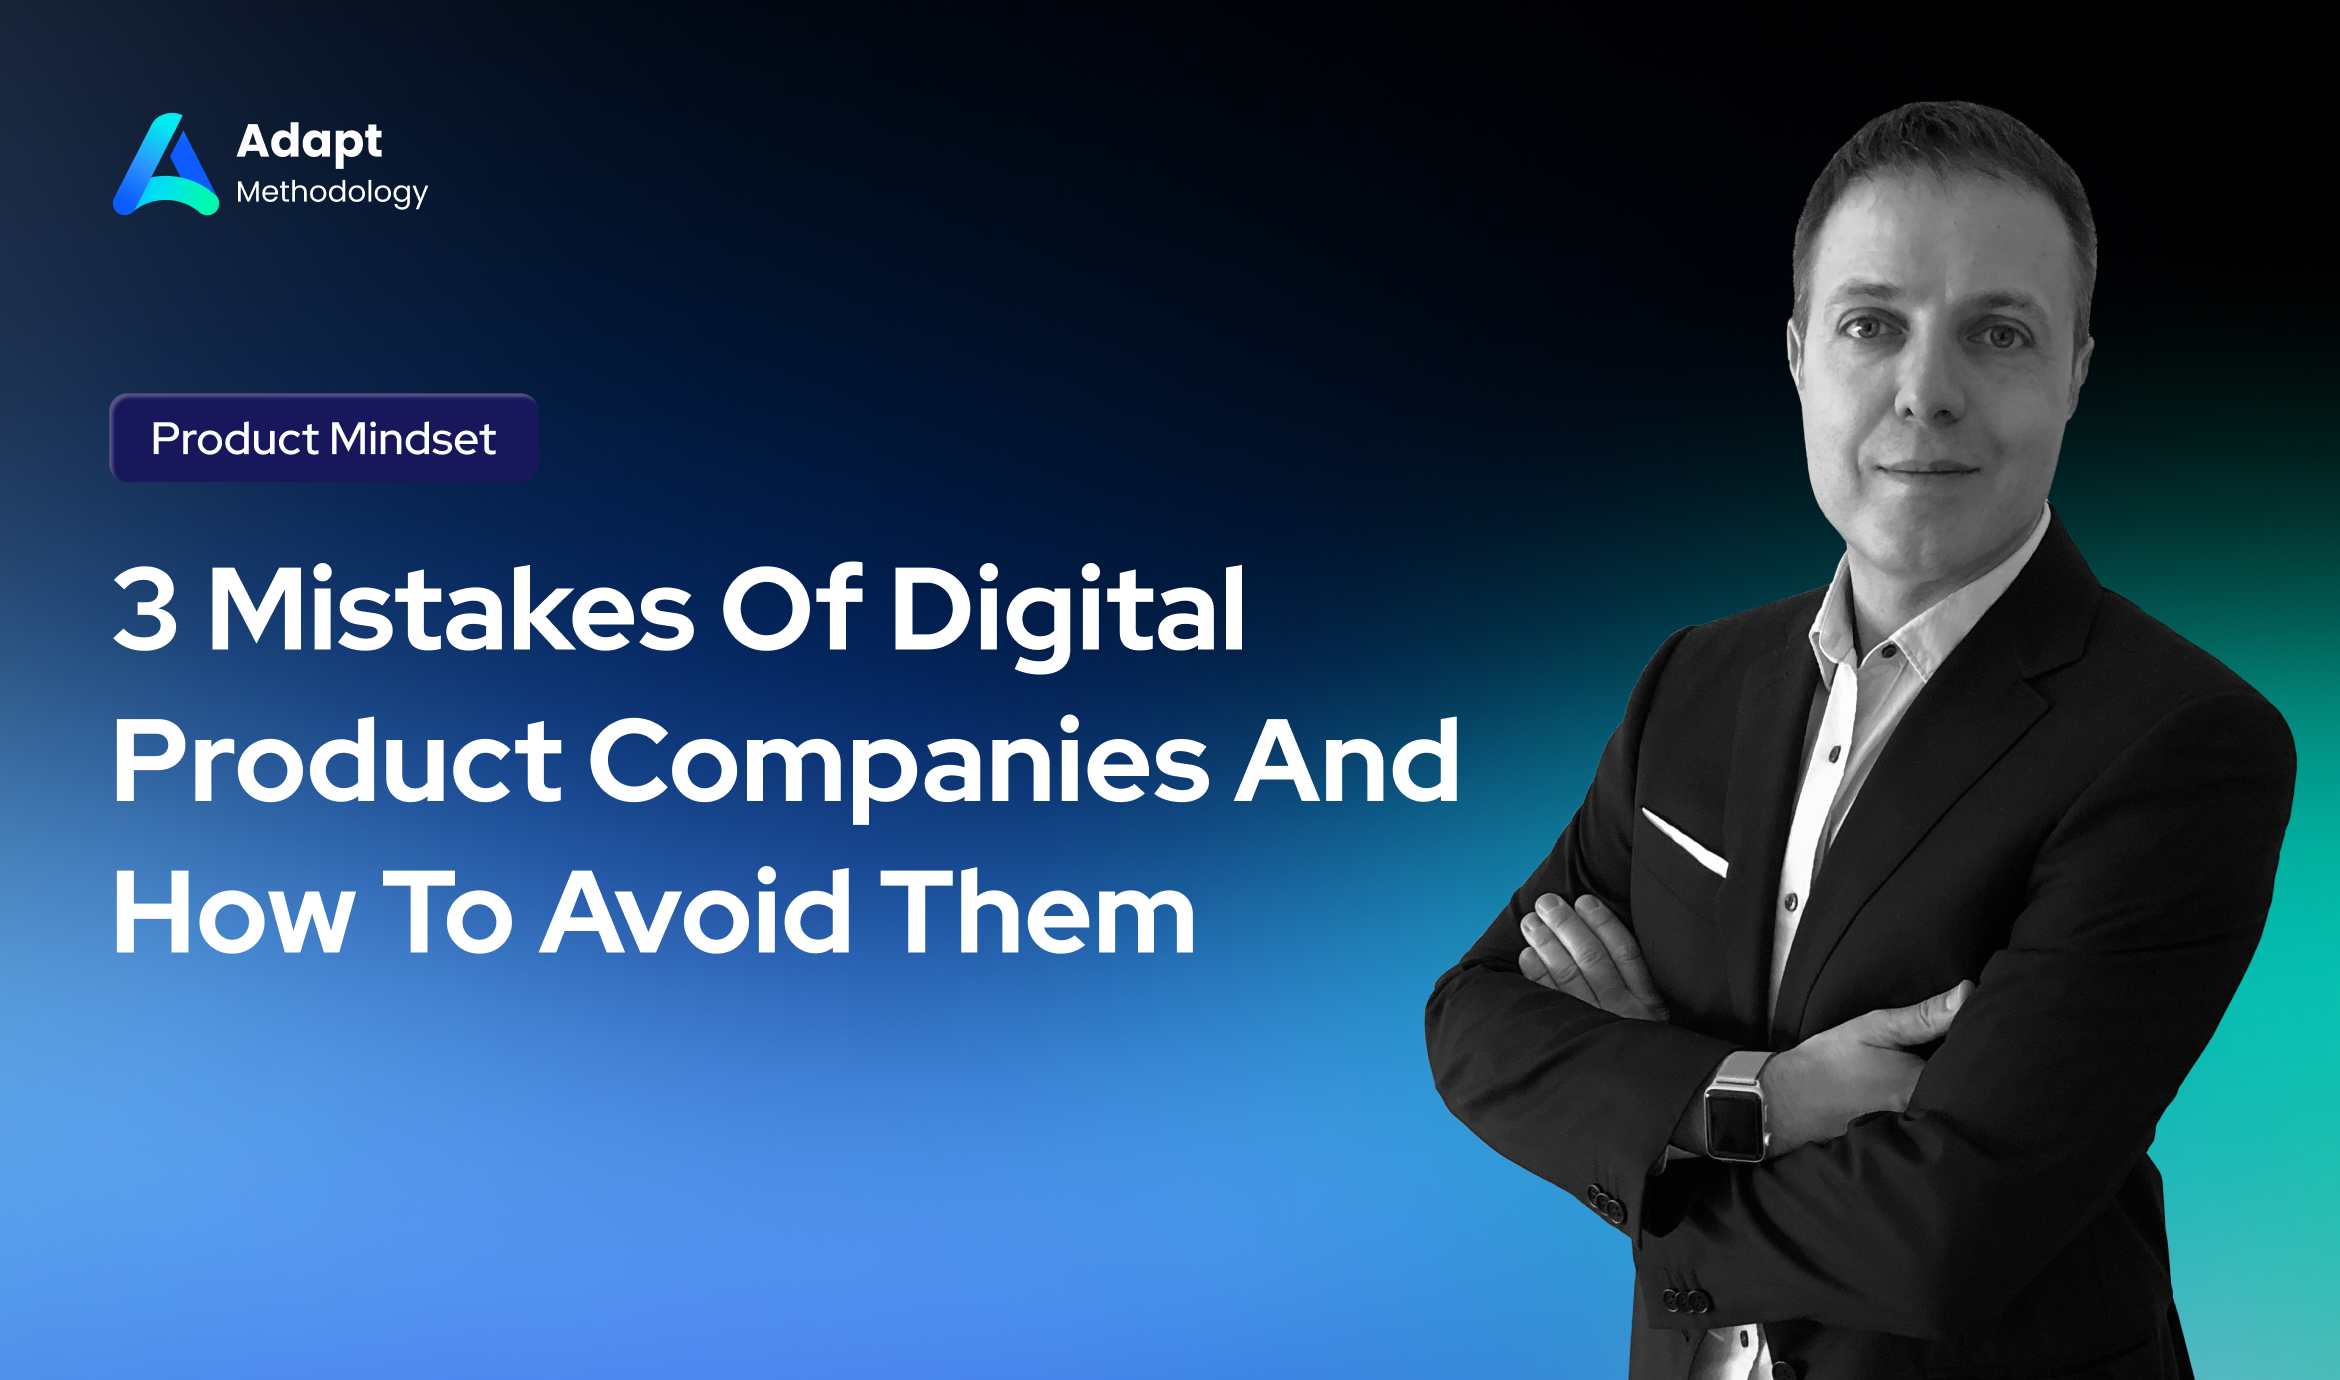 3 Mistakes Of Digital Product Companies And How To Avoid Them